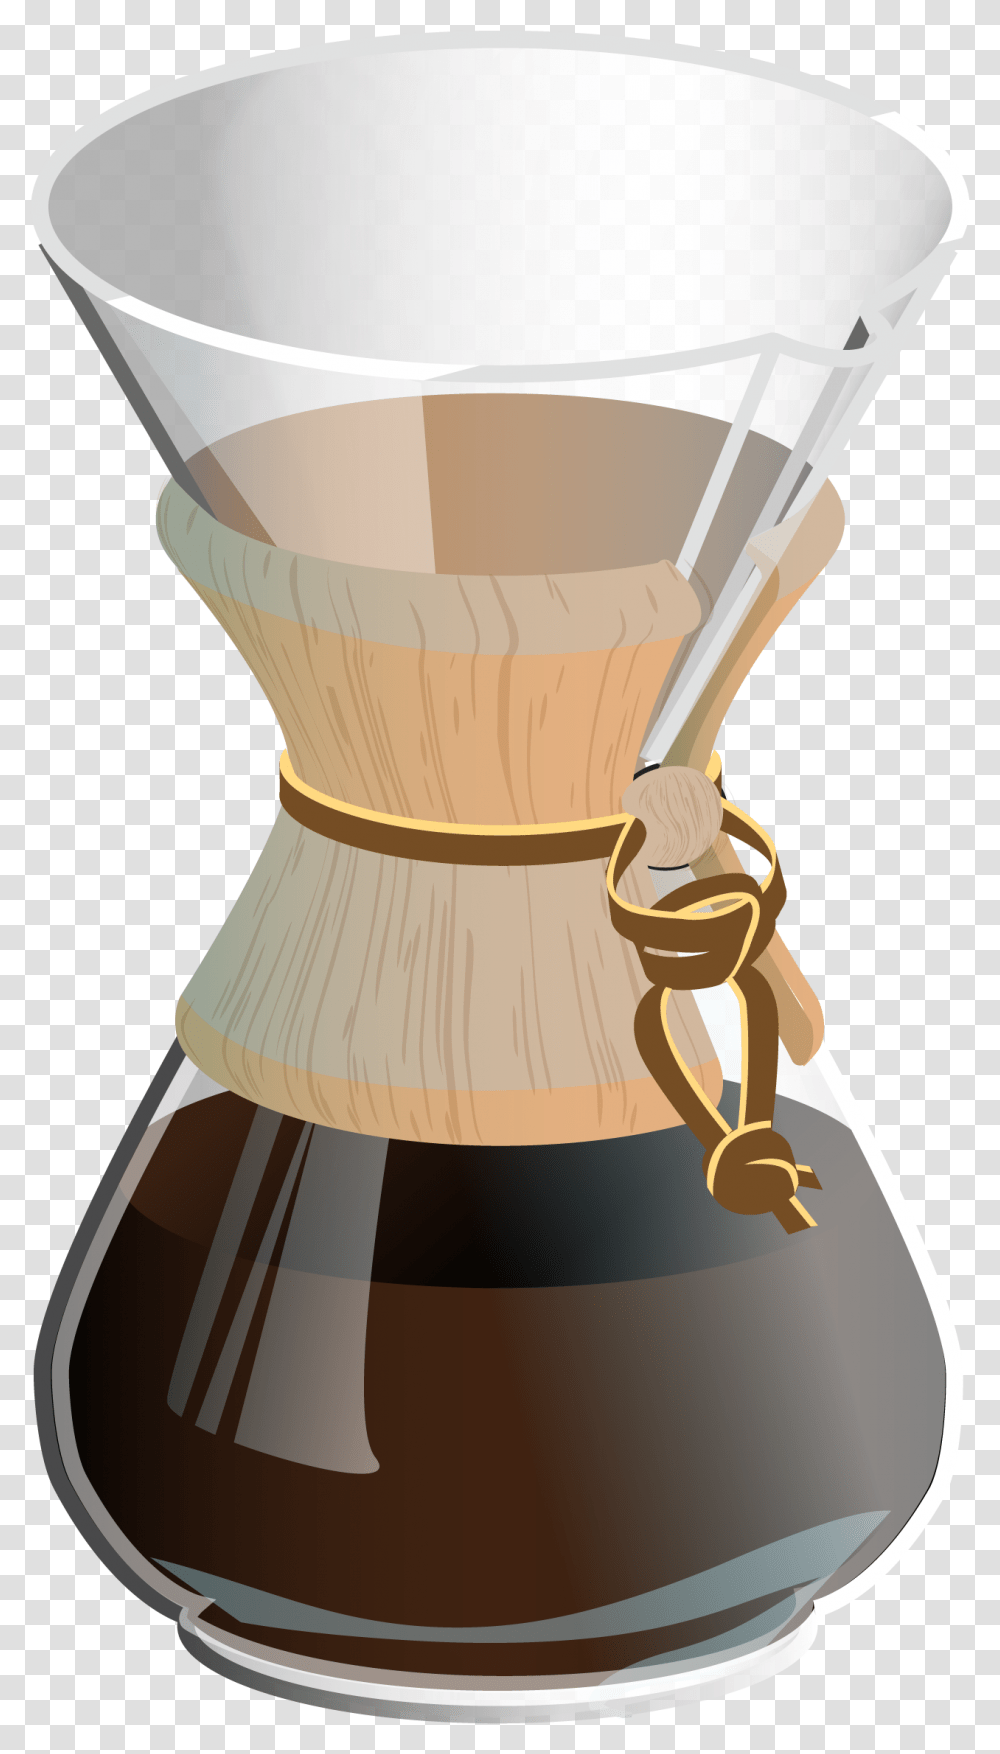 Chemex 8 Cup Brewer Glass Coffee Brewing Equipment, Bottle, Lamp, Building, Architecture Transparent Png